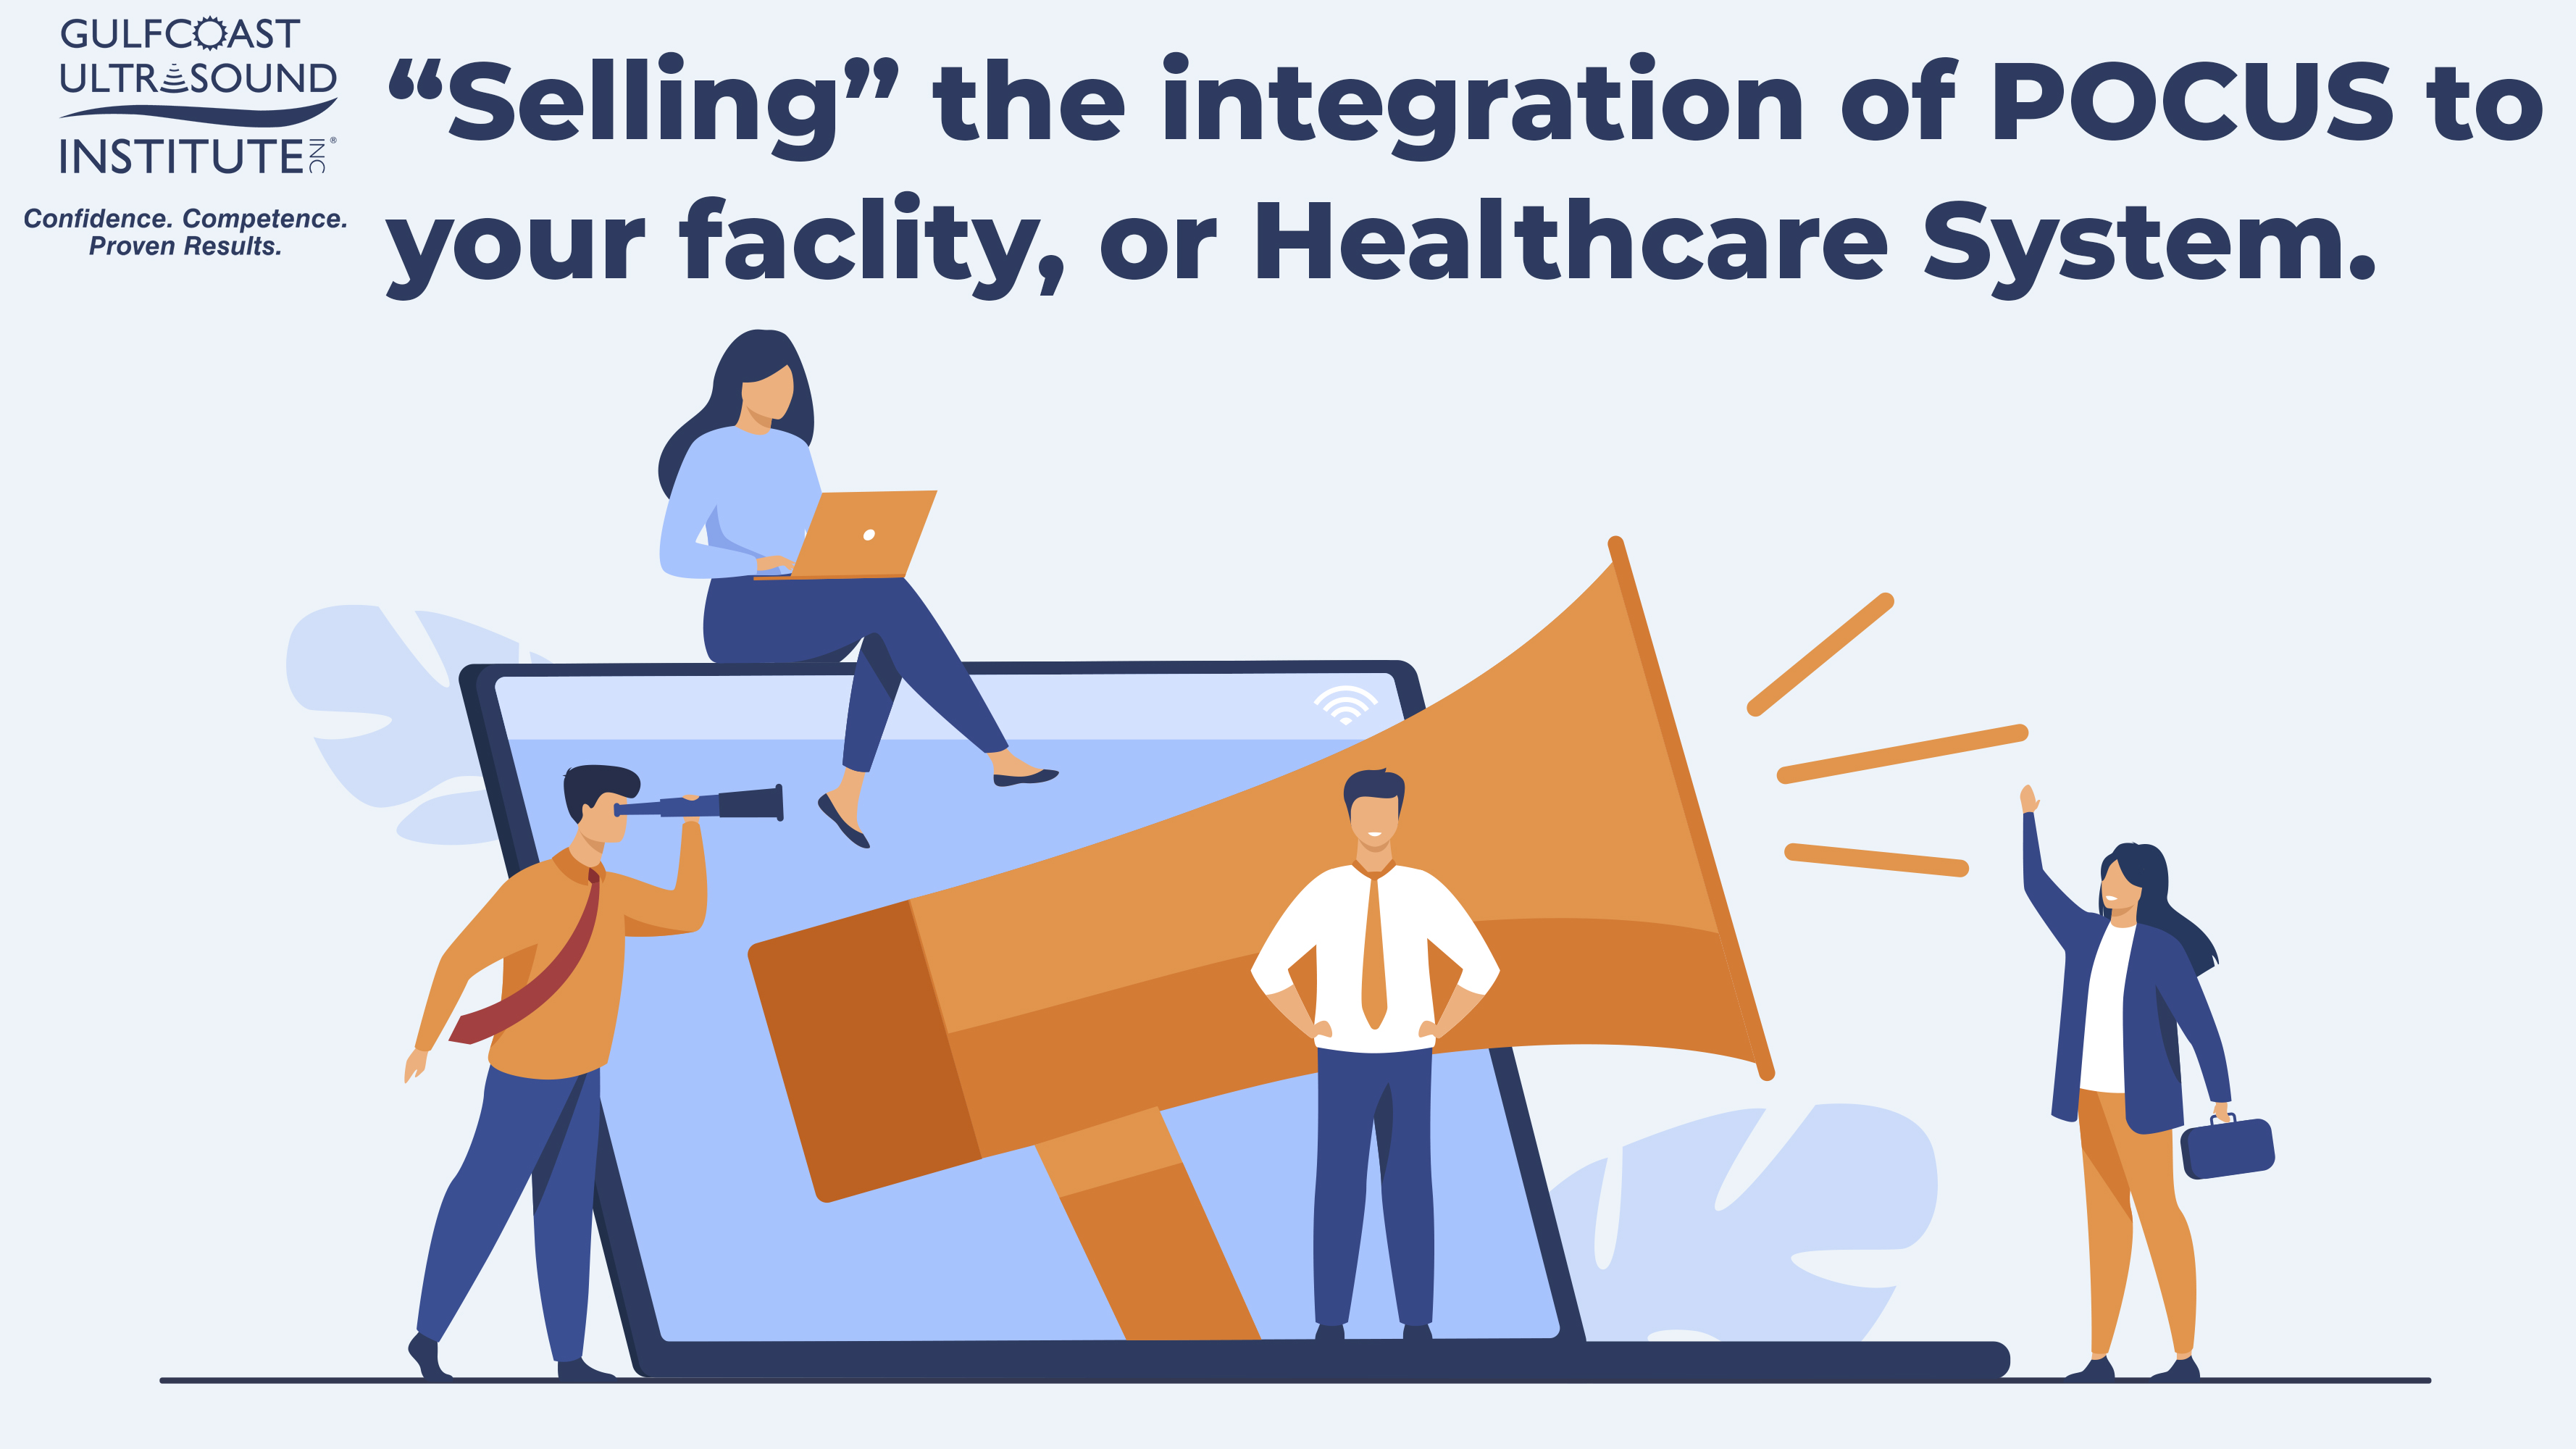 <strong><h1>“Selling” the integration of POCUS to your facility or healthcare system</strong></h1>